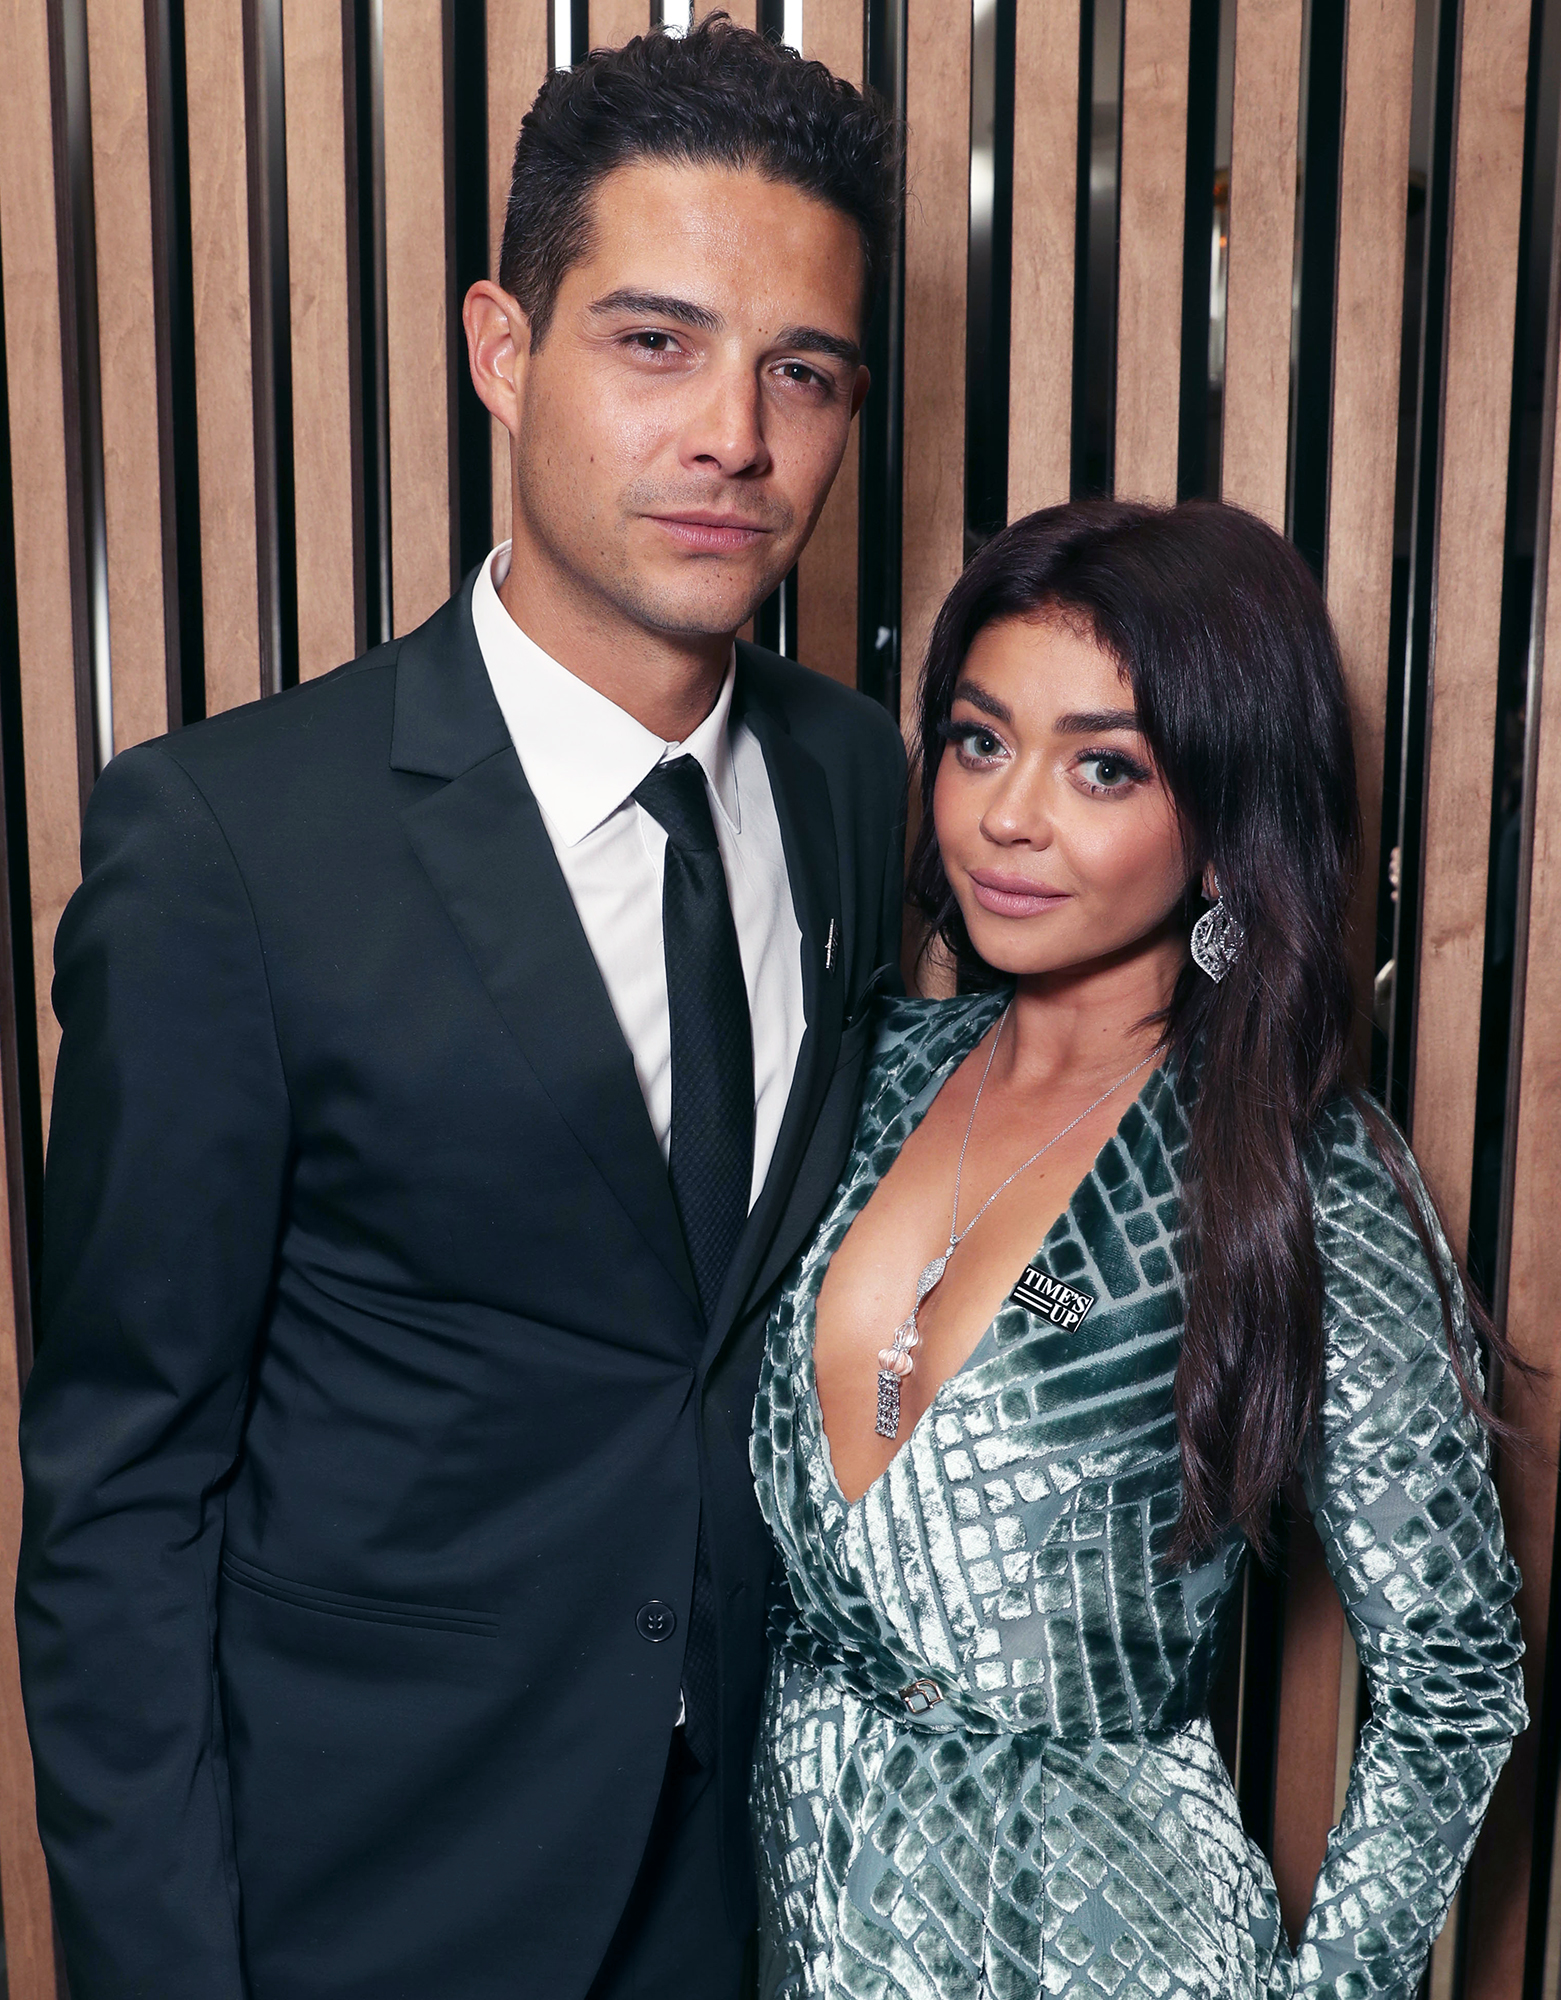 Sarah Hyland and Wells Adams Celebs Joke About Splitting From Their Partners Amid Quarantine